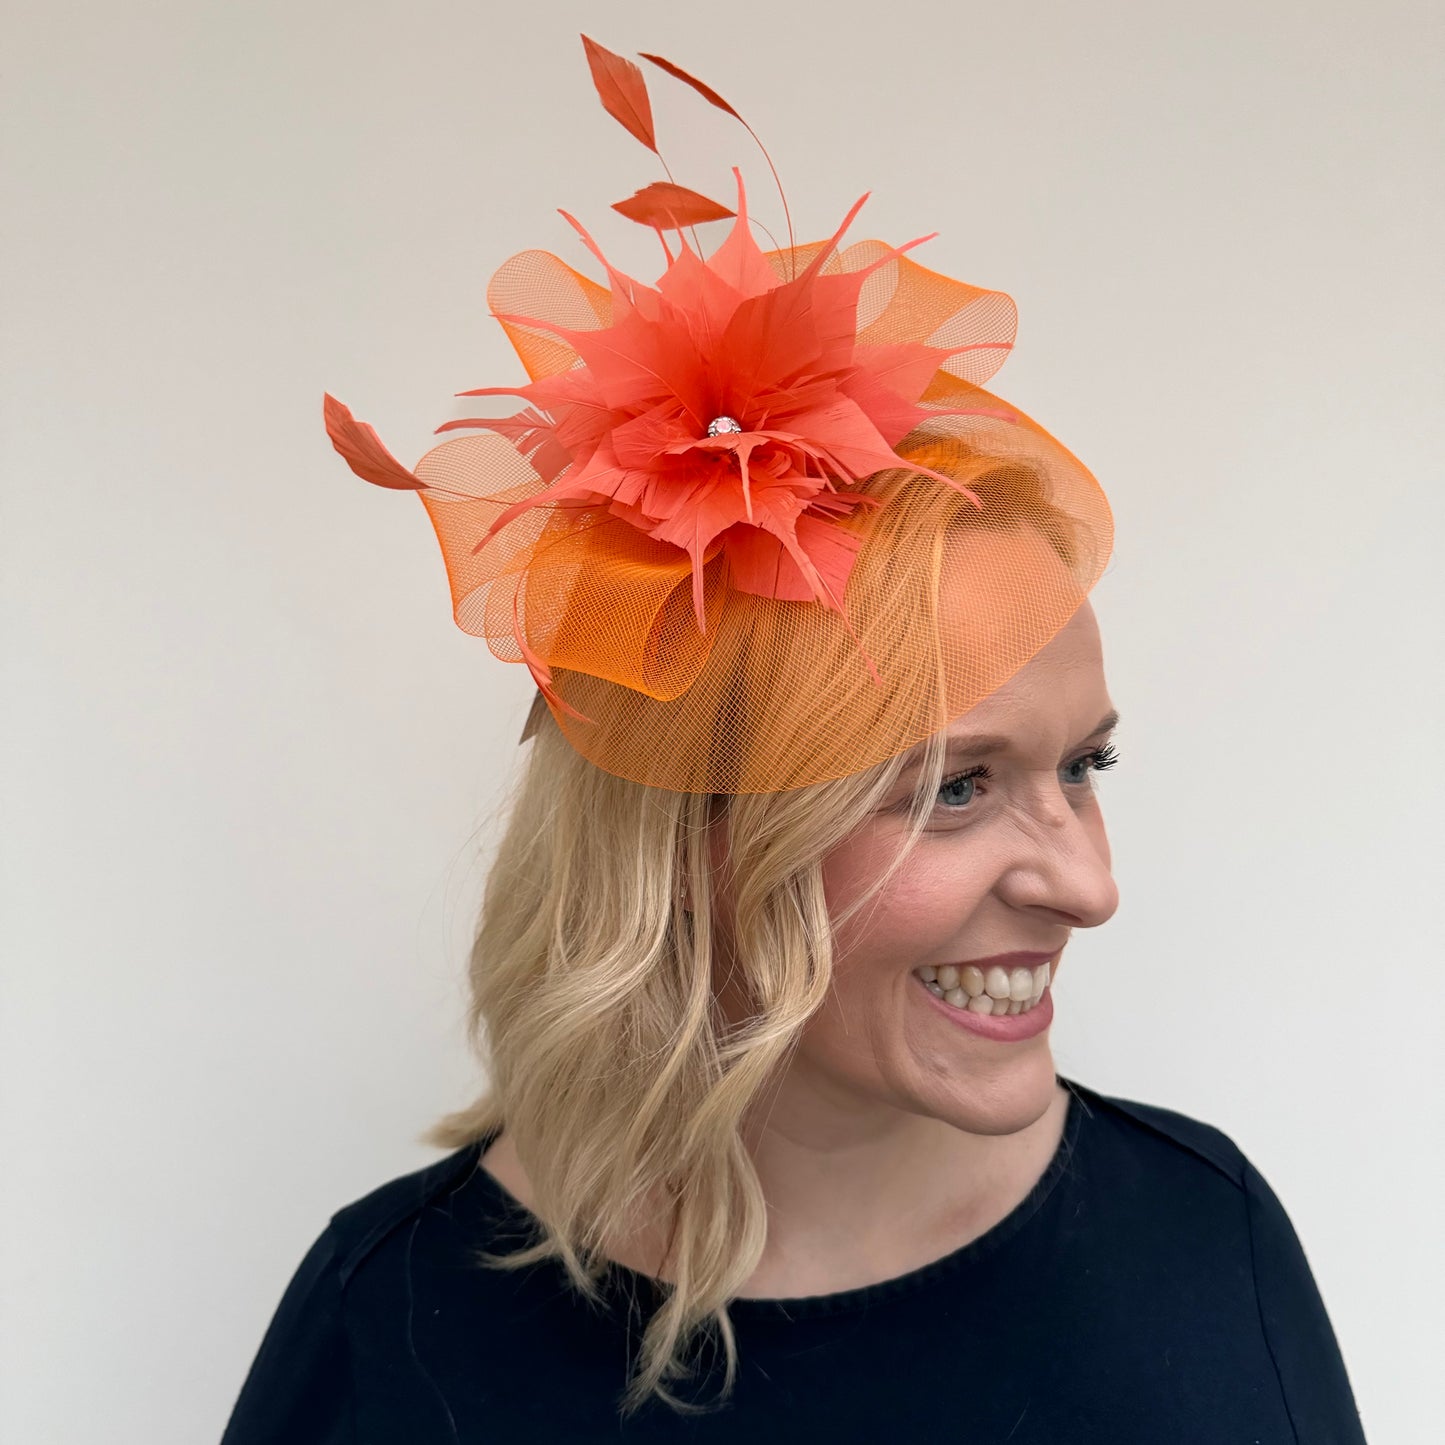 J Bees JB20/598 Net Fascinator in Red and Oranges